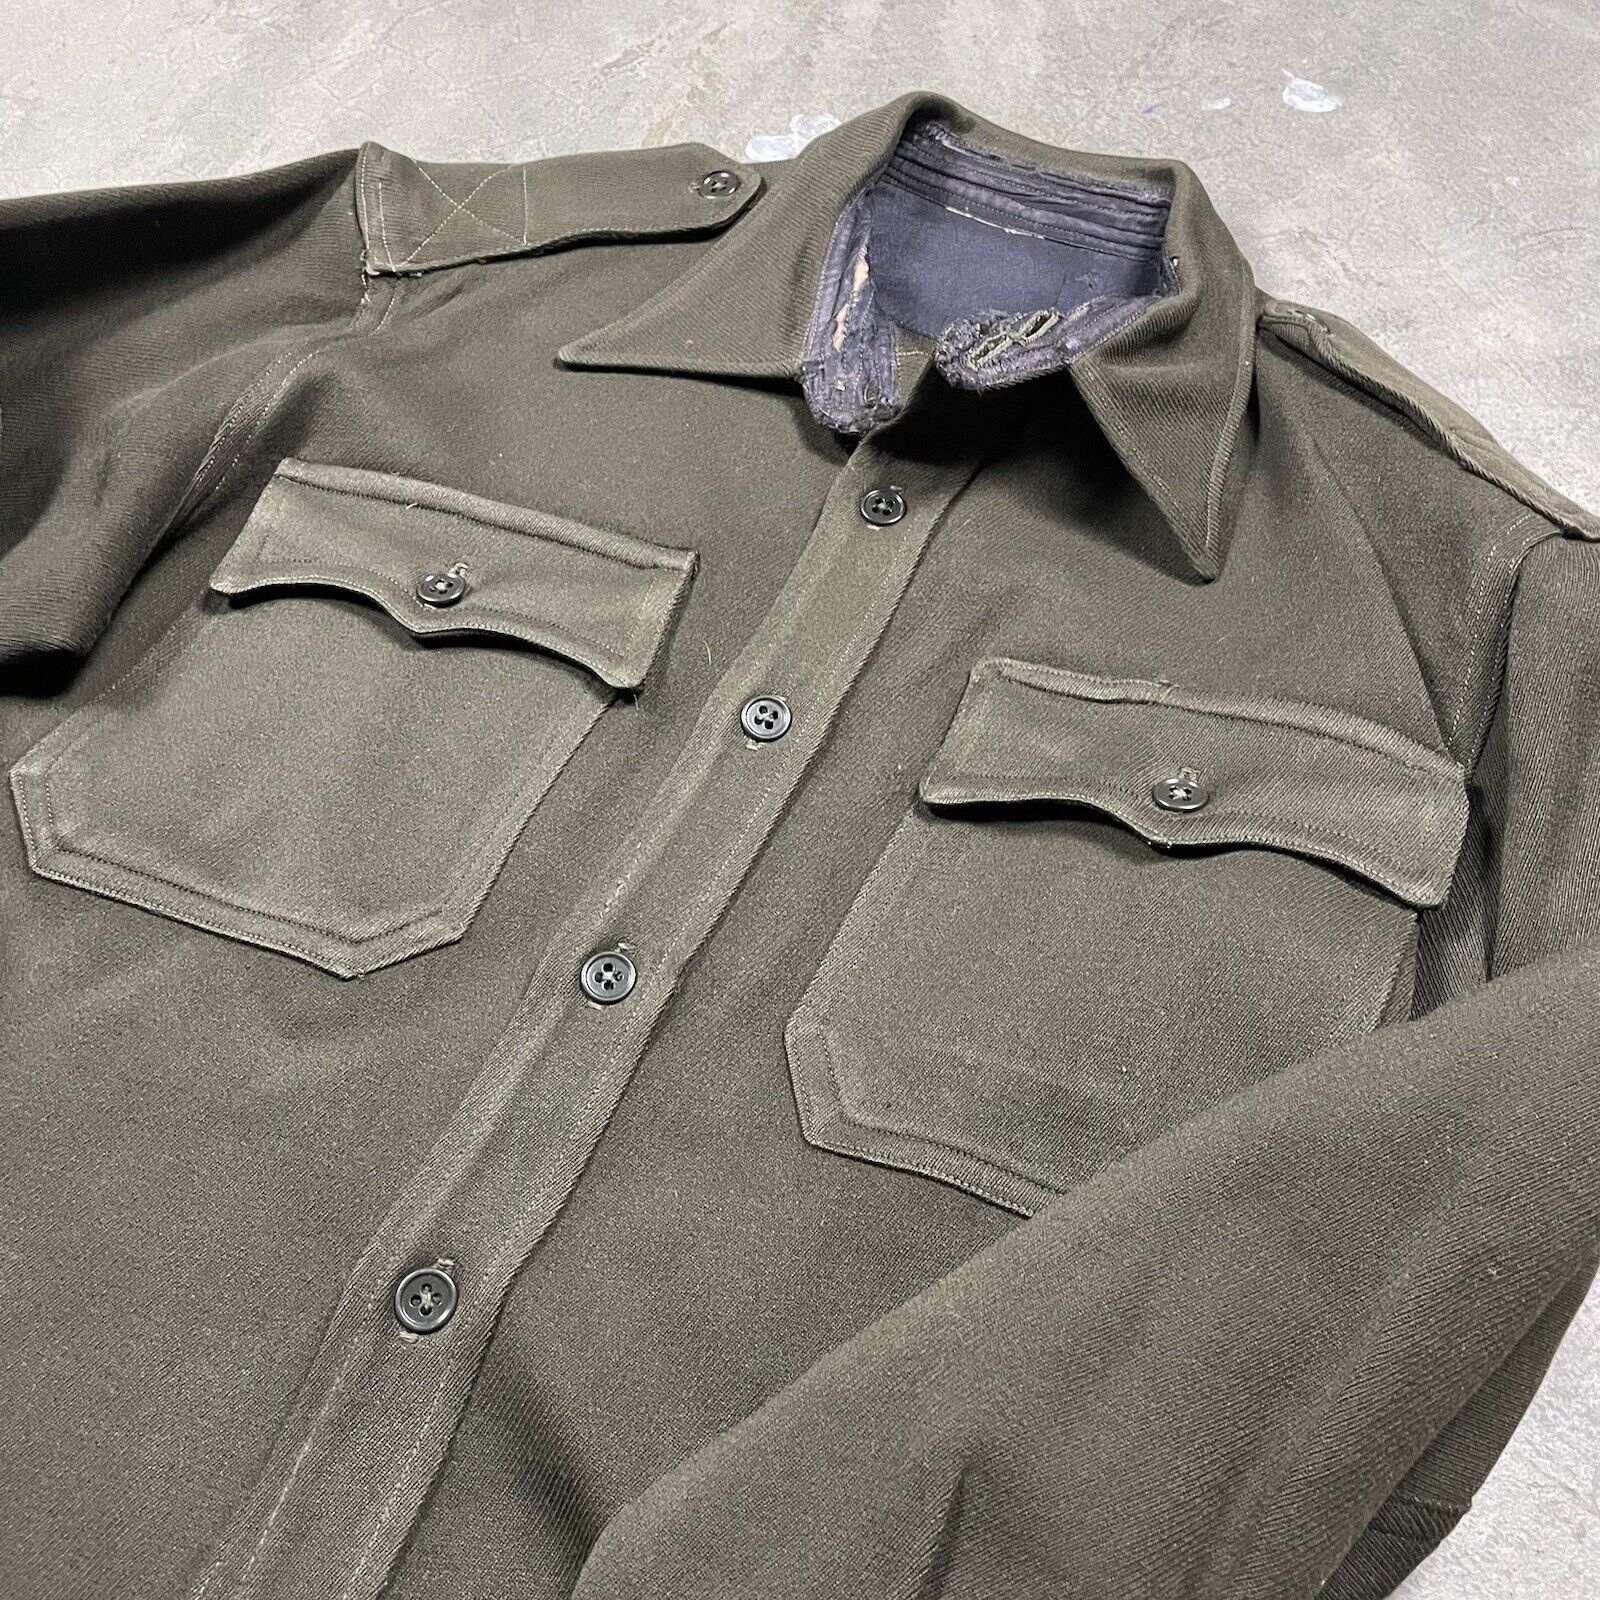 Vintage 40s 50s Military Officers Air Force Army Shirt M Heavy Olive Drab